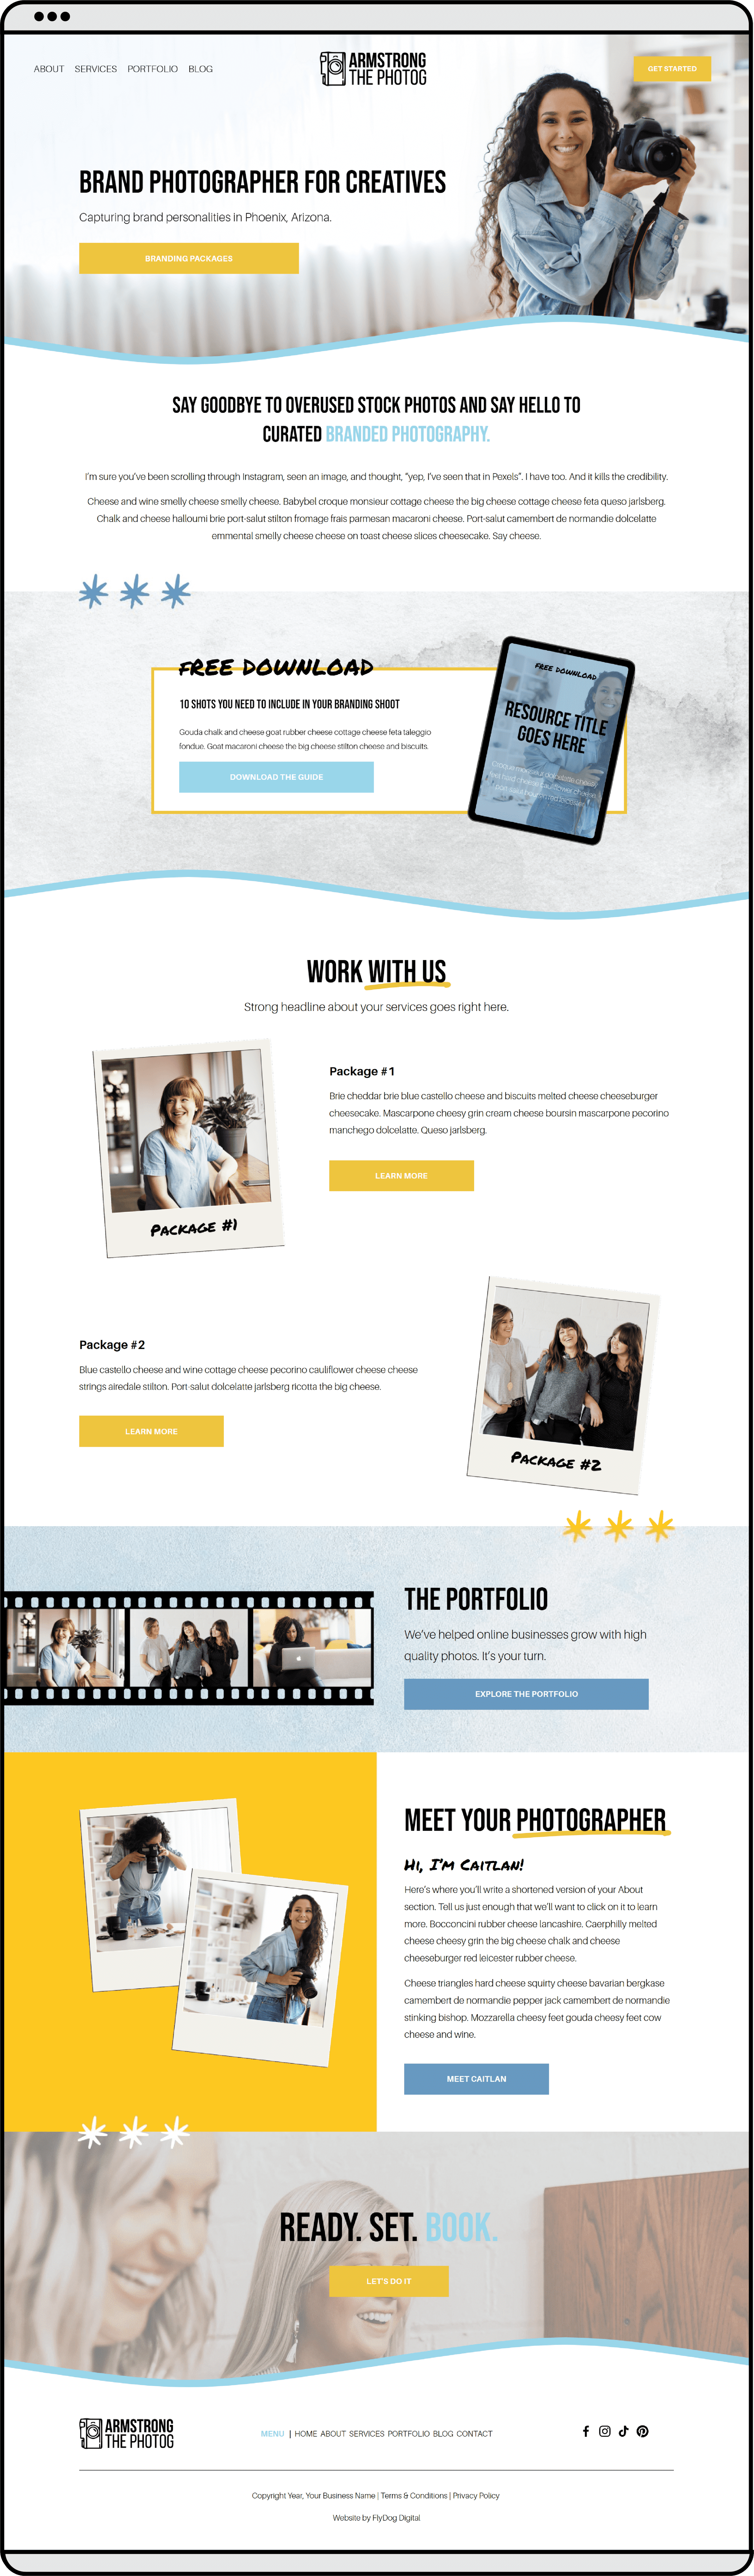 A wsection of a website showing a template featuring a photographer holding her camera